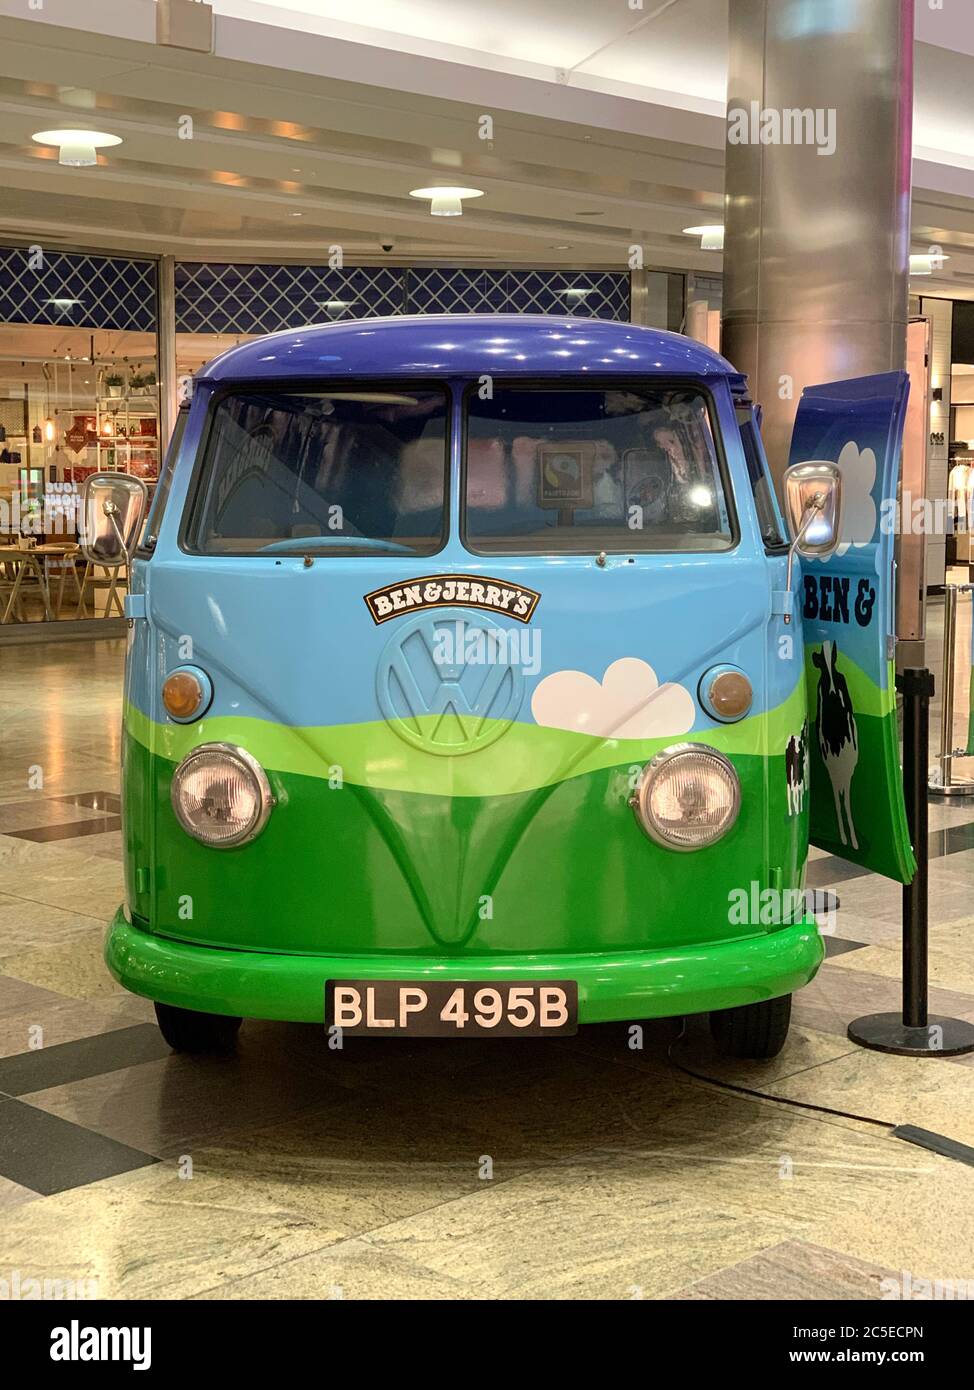 Southampton, UK 16 January 2020: VW camper van converted to a Ben and  Jerry's Ice Cream van decorated with a grass and blue sky design, in West  Quay Stock Photo Alamy